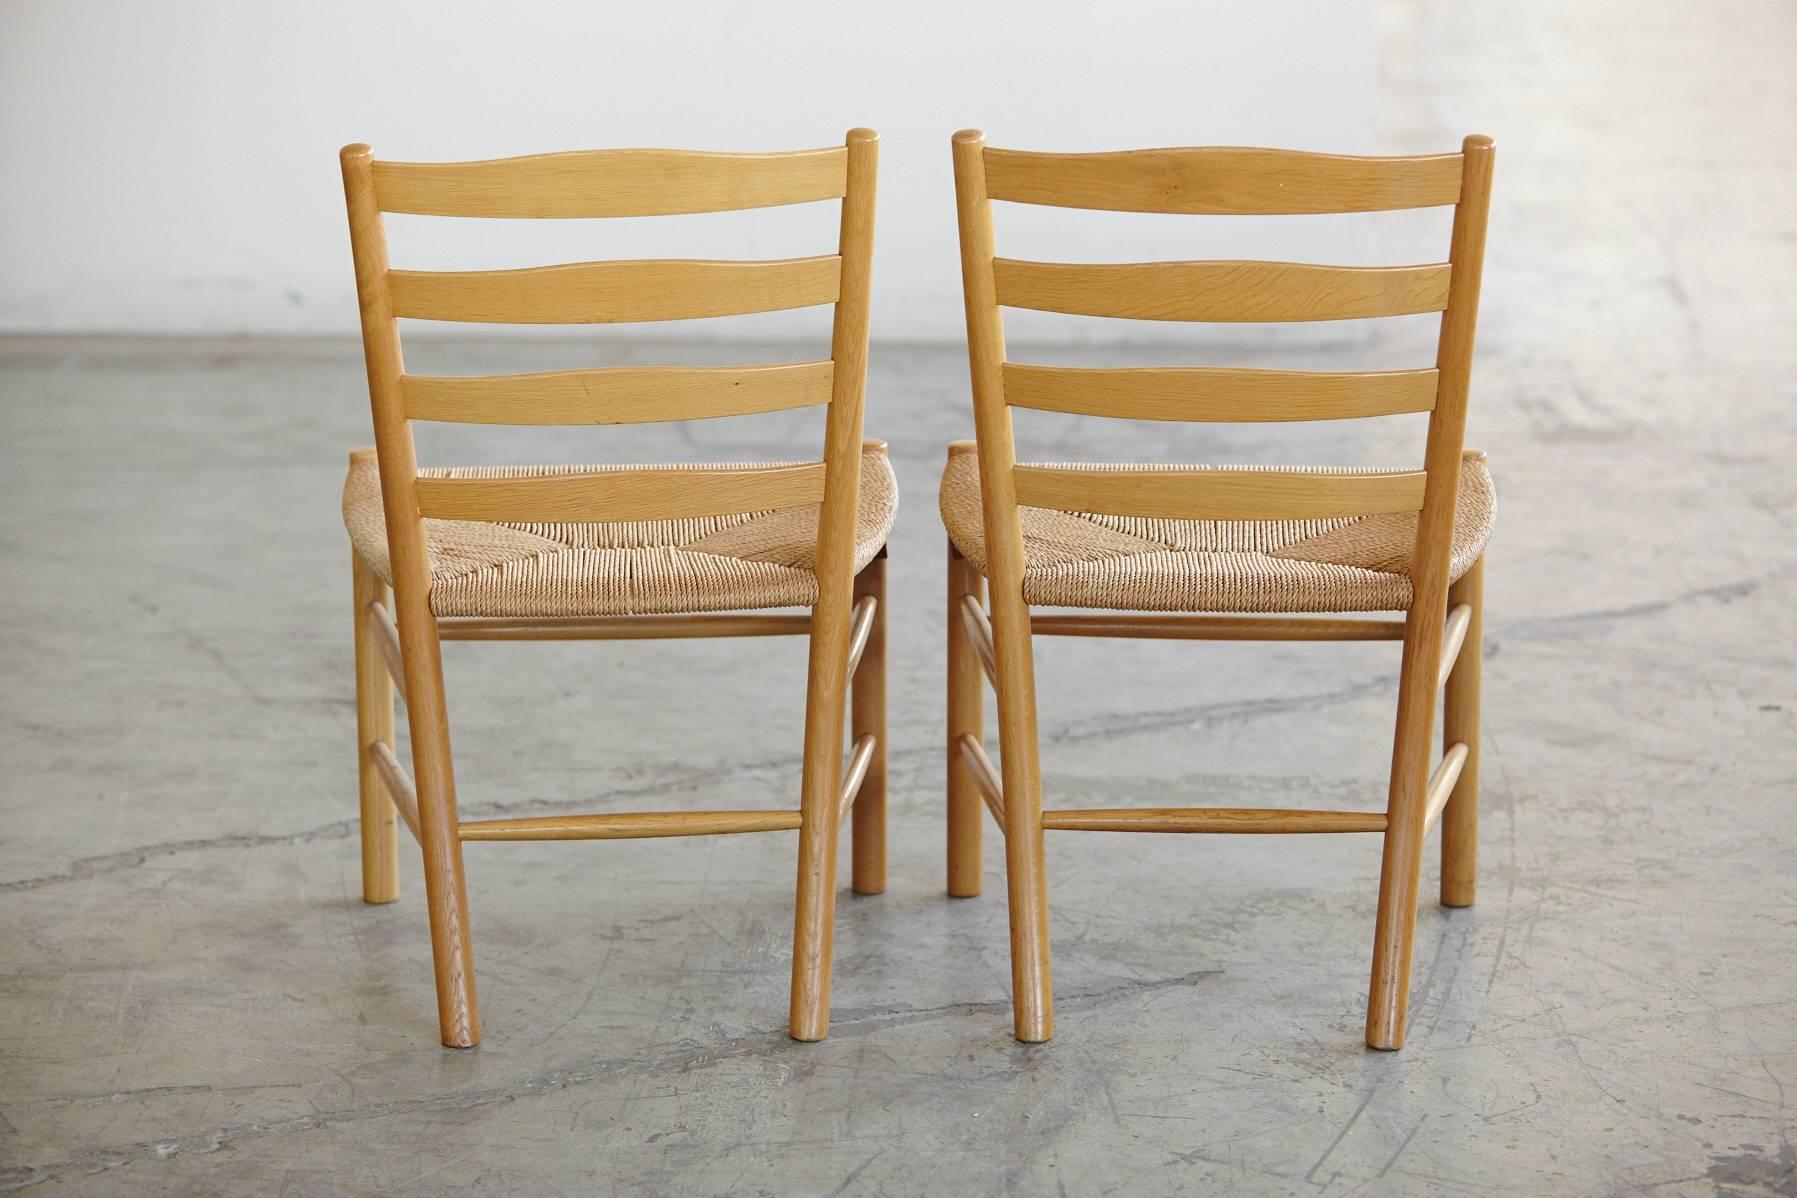 20th Century 88 Chairs in Sets of 2, 4, 6, 8, 10 or More by Kaare Klint for Fritz Hansen